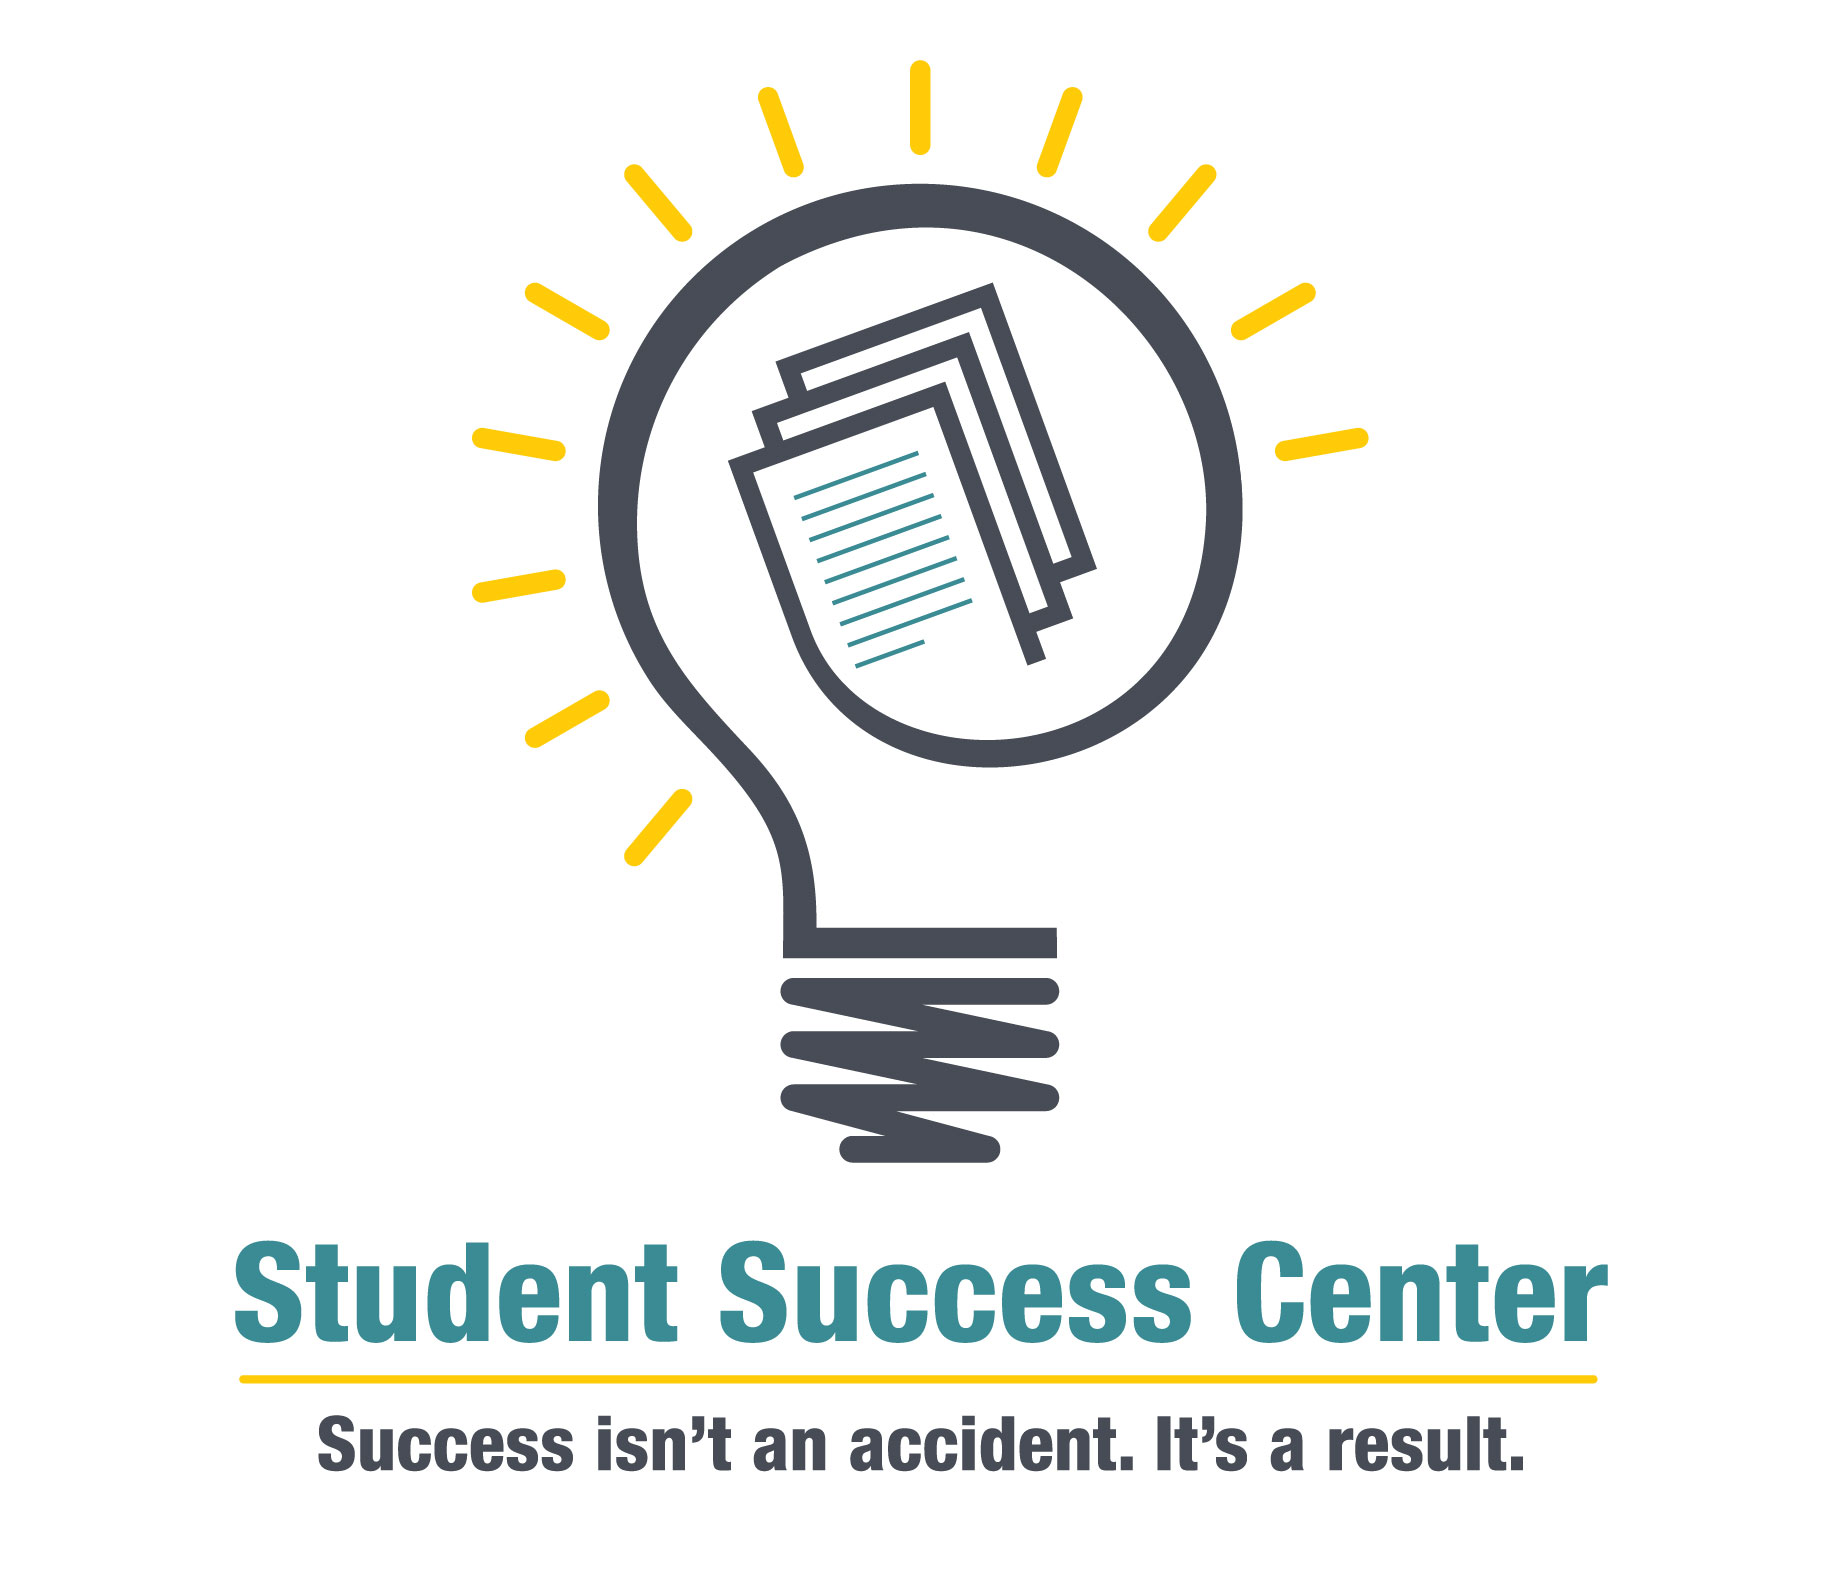 Student Success Center - Success isn't an accident, it's a result